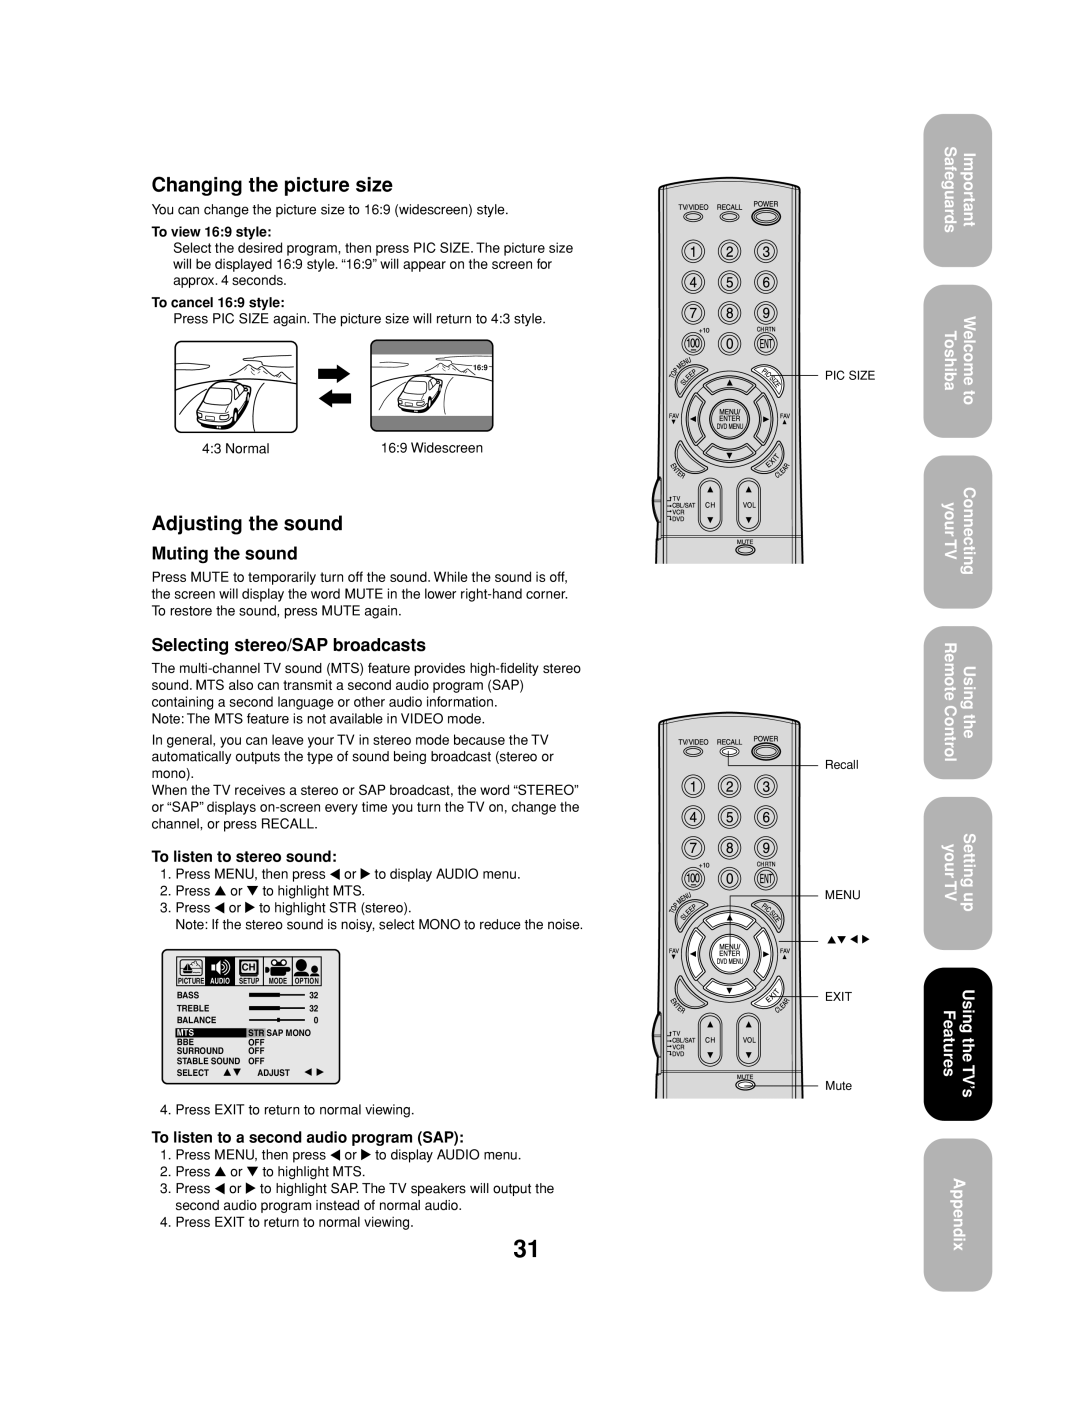 Toshiba 27AF53 appendix Changing the picture size, Adjusting the sound, Muting the sound, Selecting stereo/SAP broadcasts 